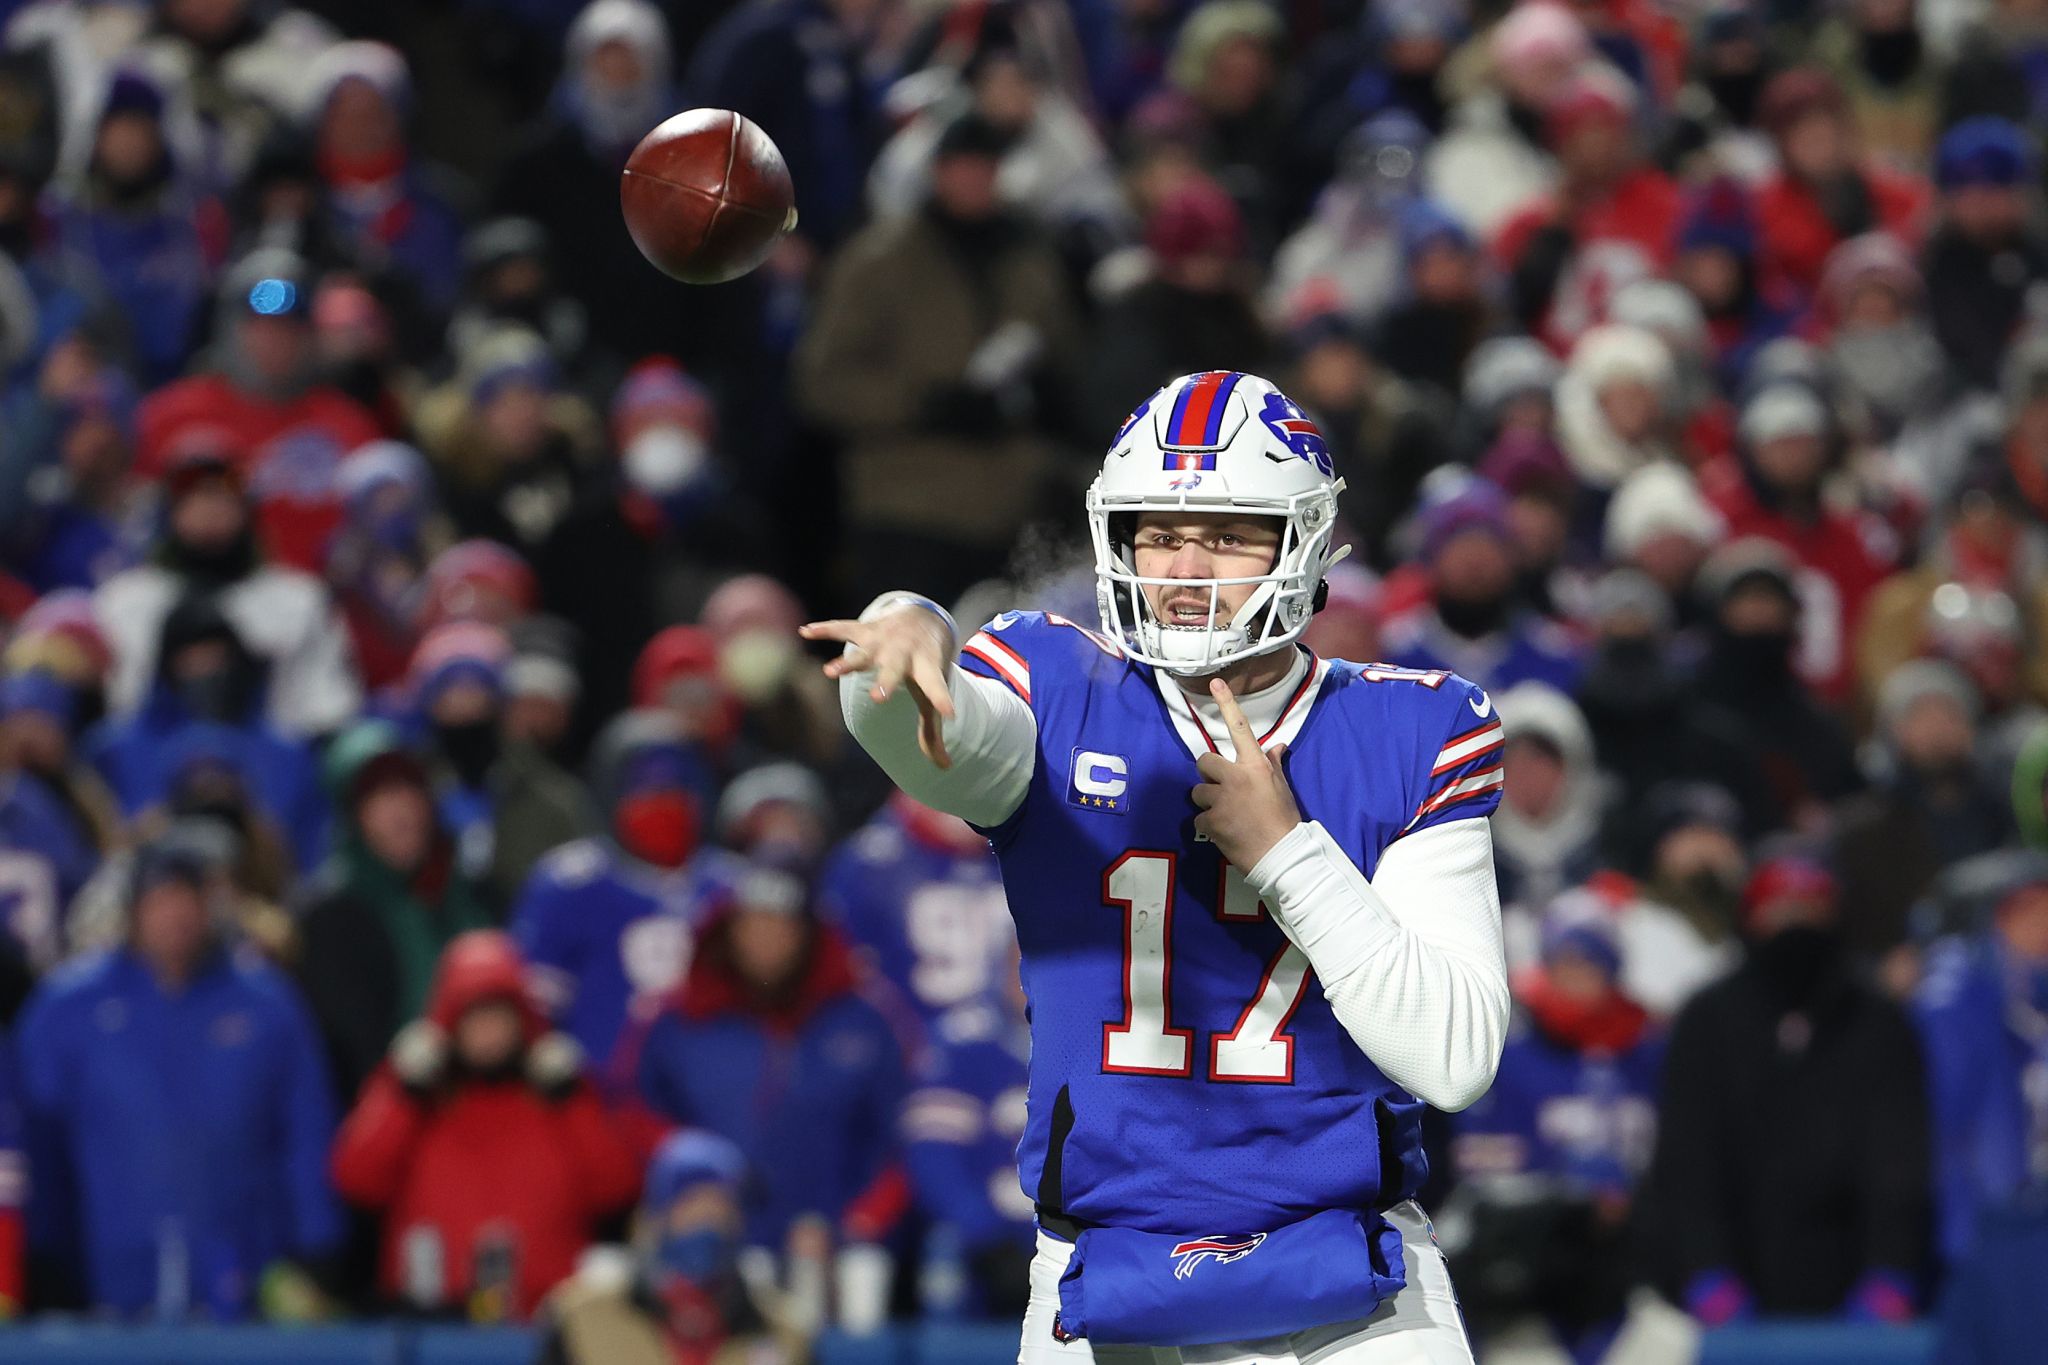 Bengals-Bills AFC divisional round odds, lines, spread and best bet -  Sports Illustrated